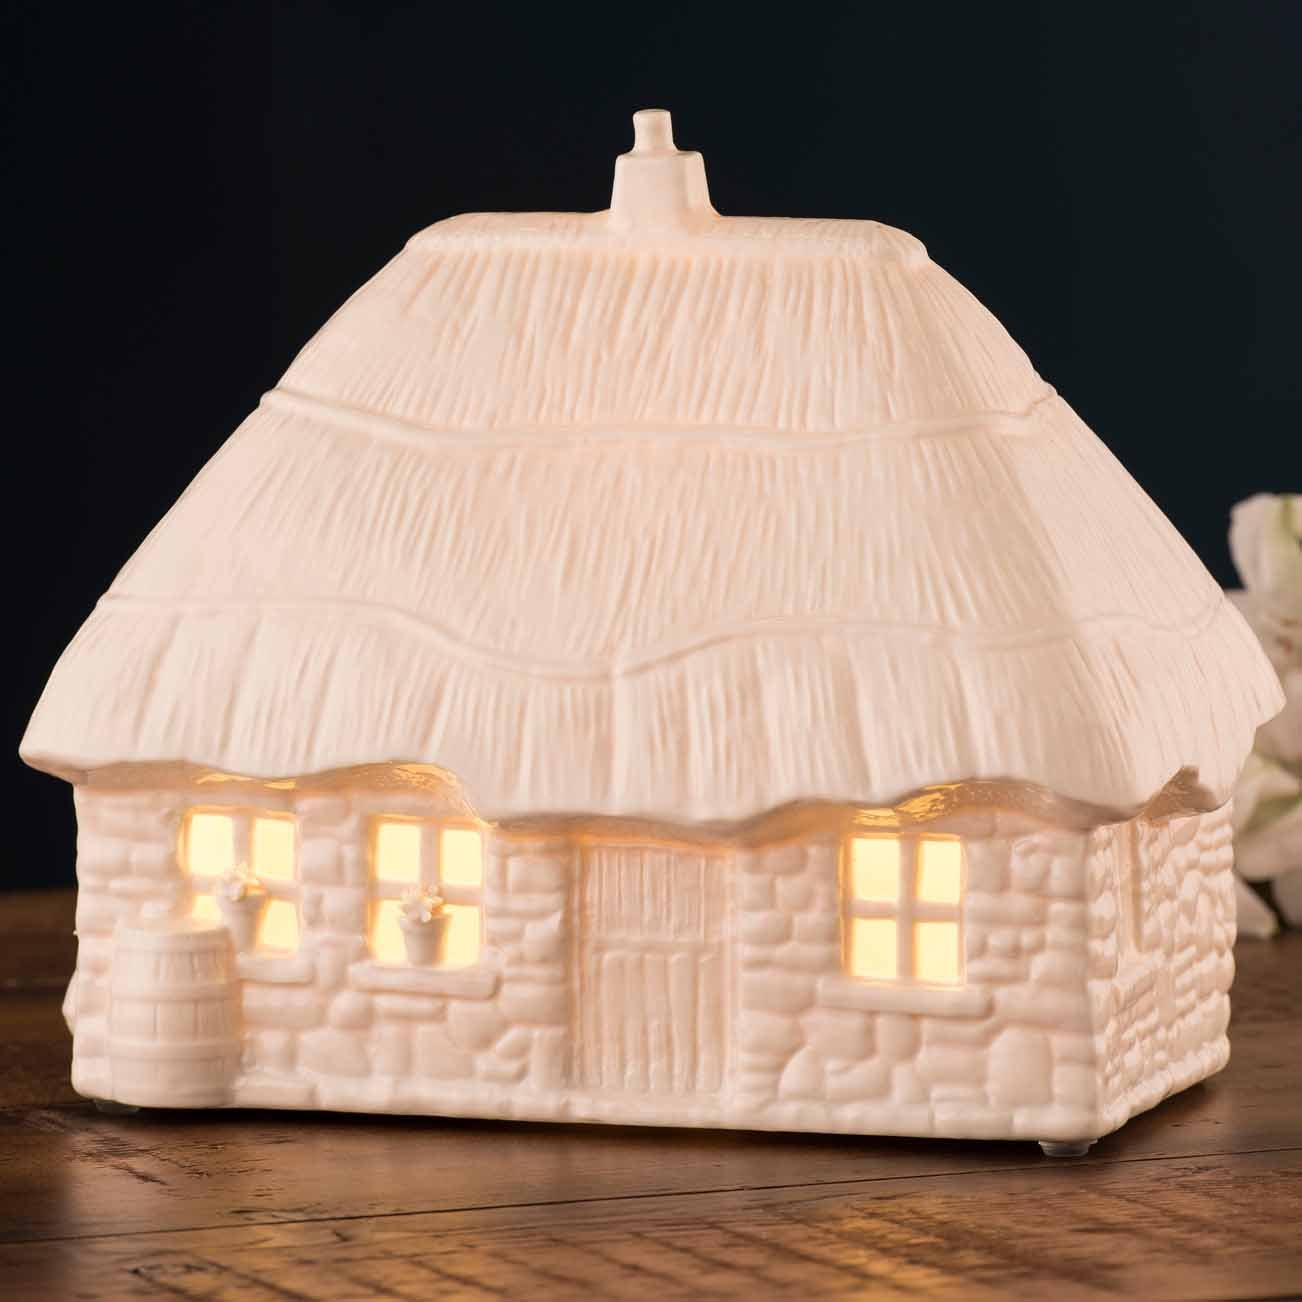 Product image for Belleek Pottery | Thatched Cottage Luminaire